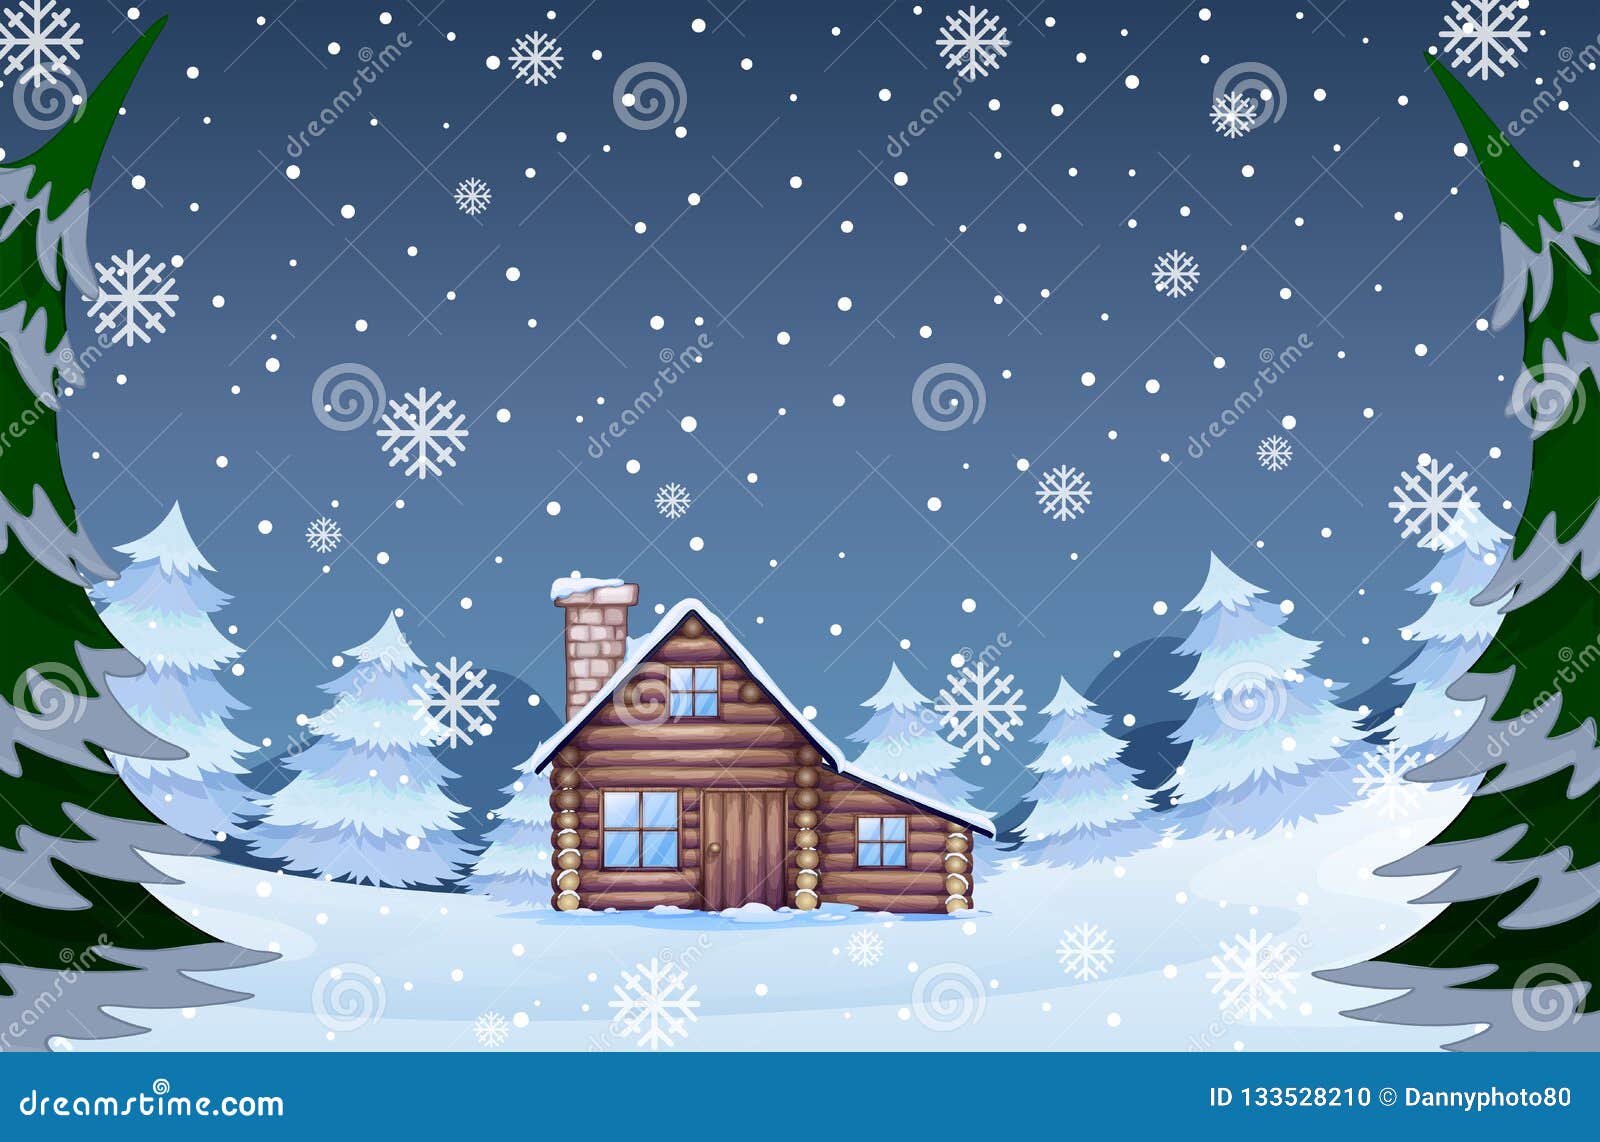 Winter Forest Clipart Stock Illustrations 2 763 Winter Forest Clipart Stock Illustrations Vectors Clipart Dreamstime